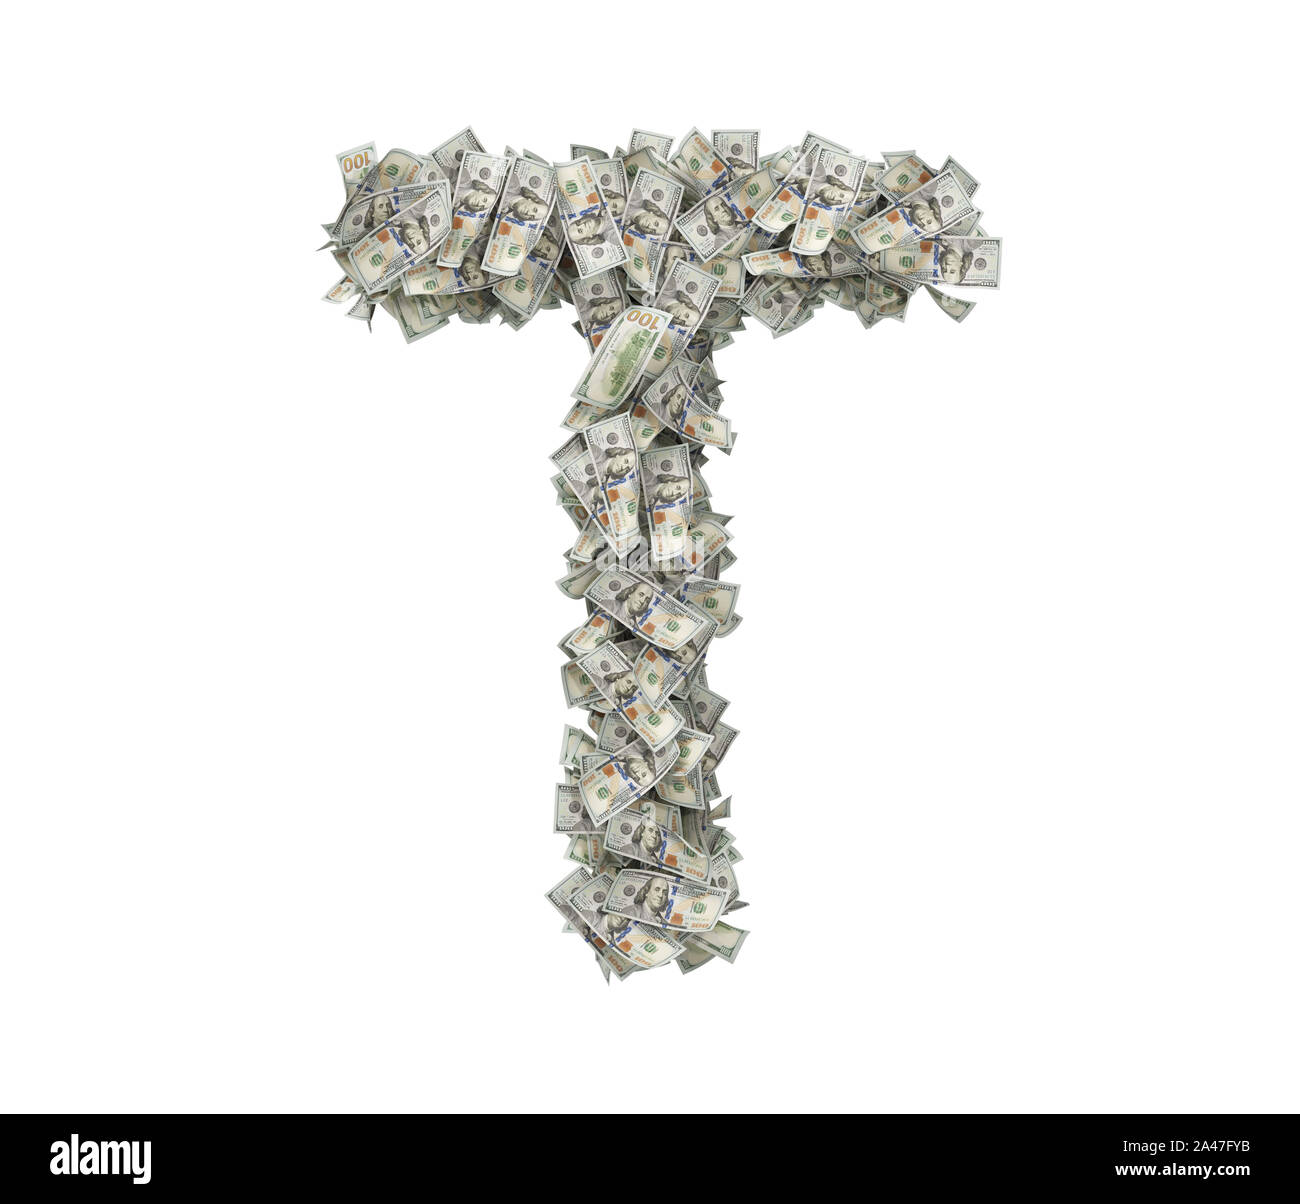 3d rendering of a large isolated large letter T made of many one hundred dollar bills. Money and bills. American currency. Alphabet and letters. Stock Photo